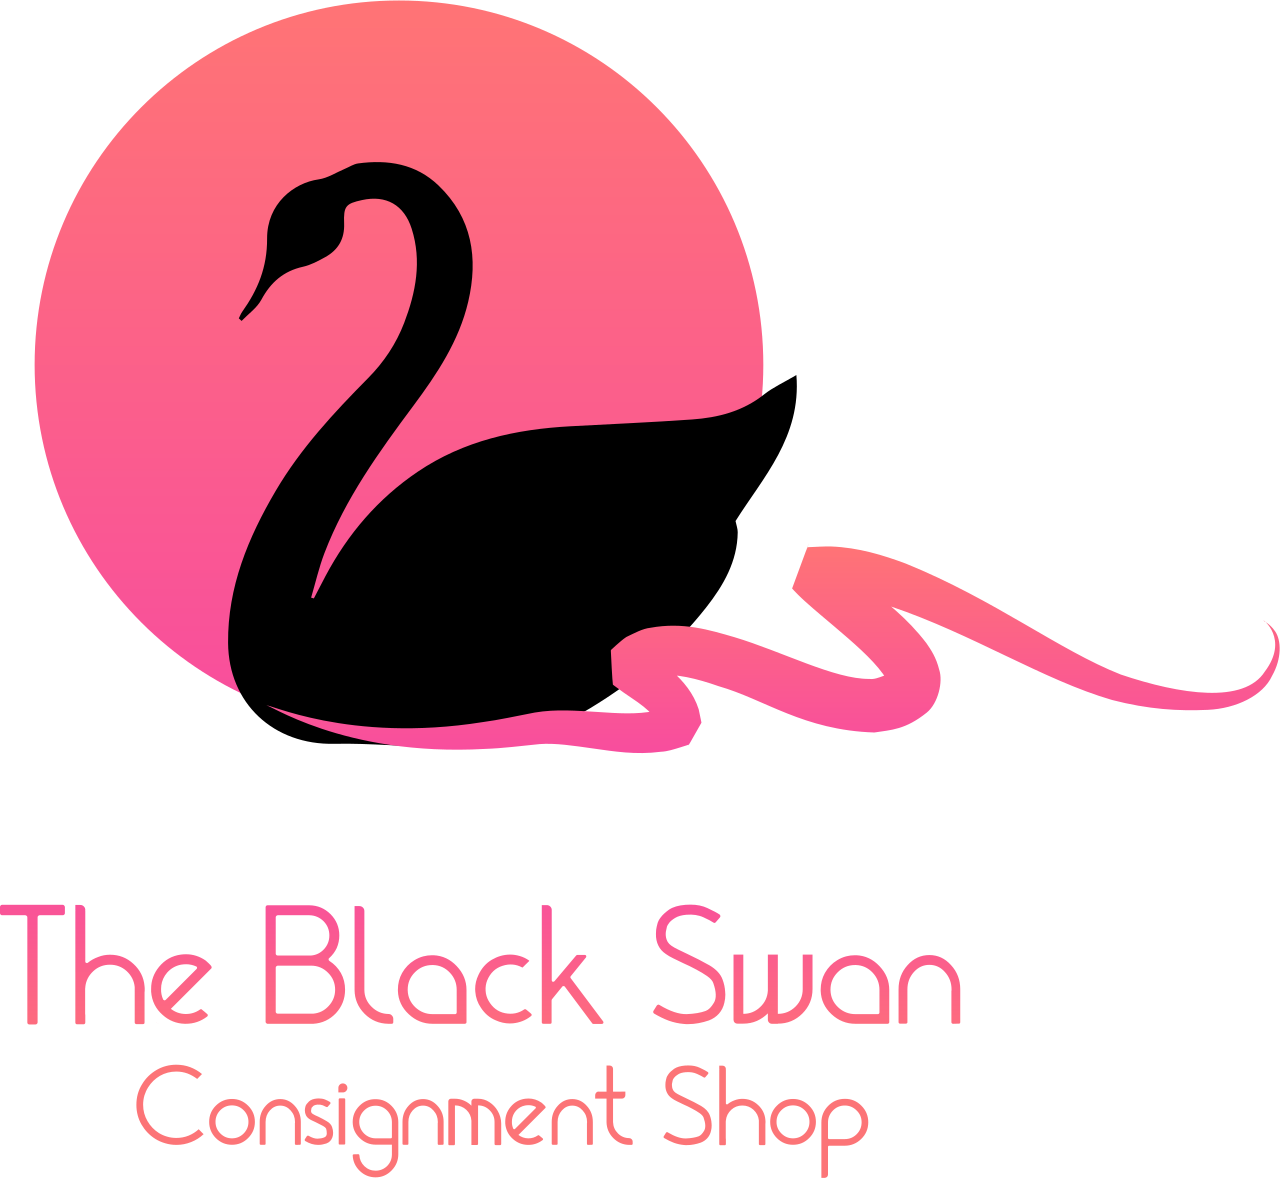 The Black Swan 's web page